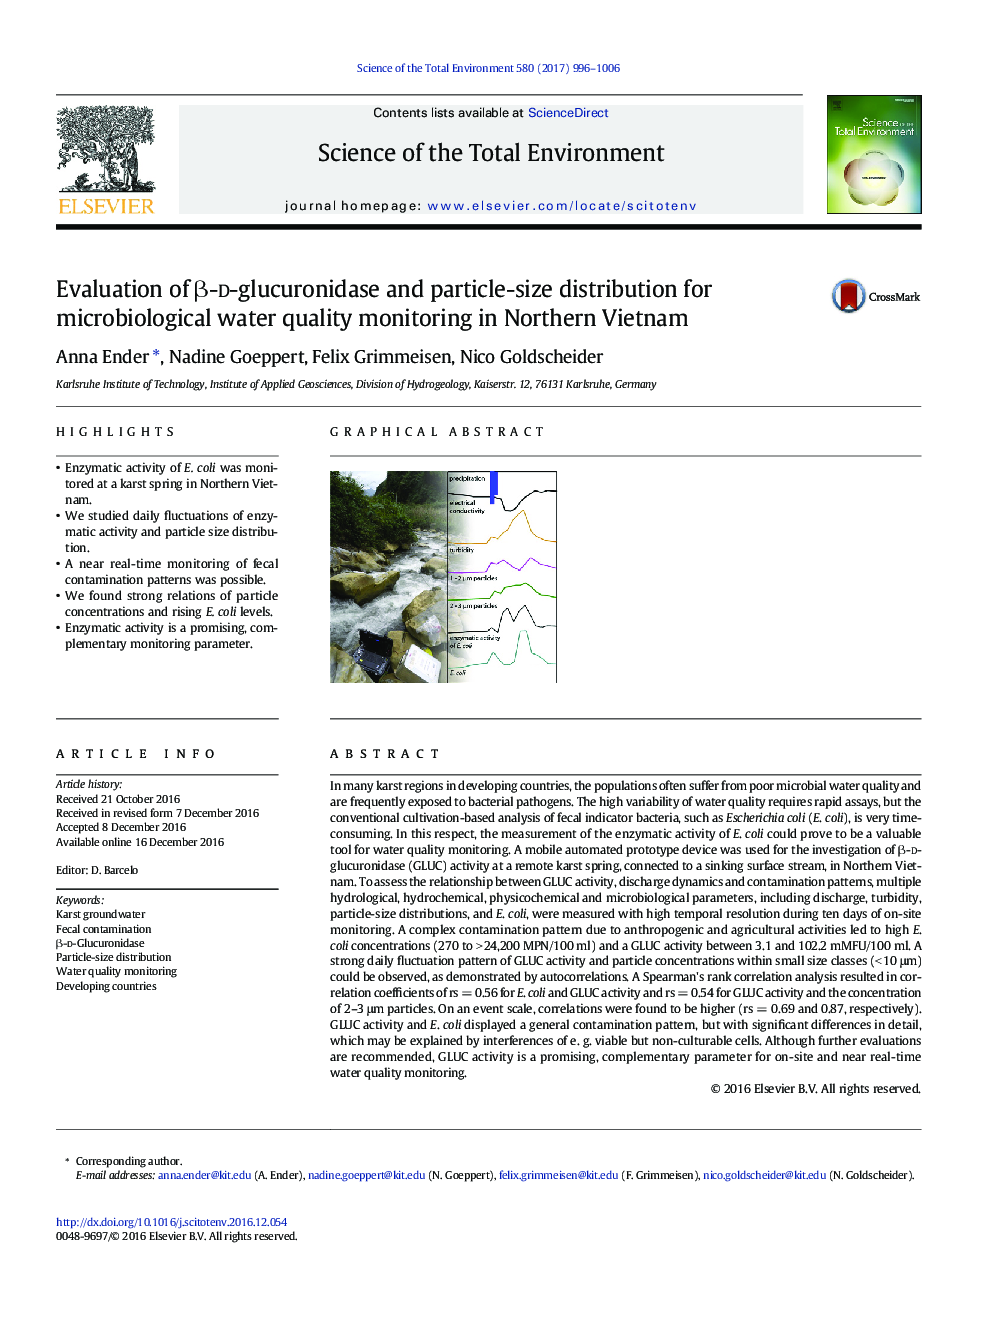 Evaluation of Î²-d-glucuronidase and particle-size distribution for microbiological water quality monitoring in Northern Vietnam